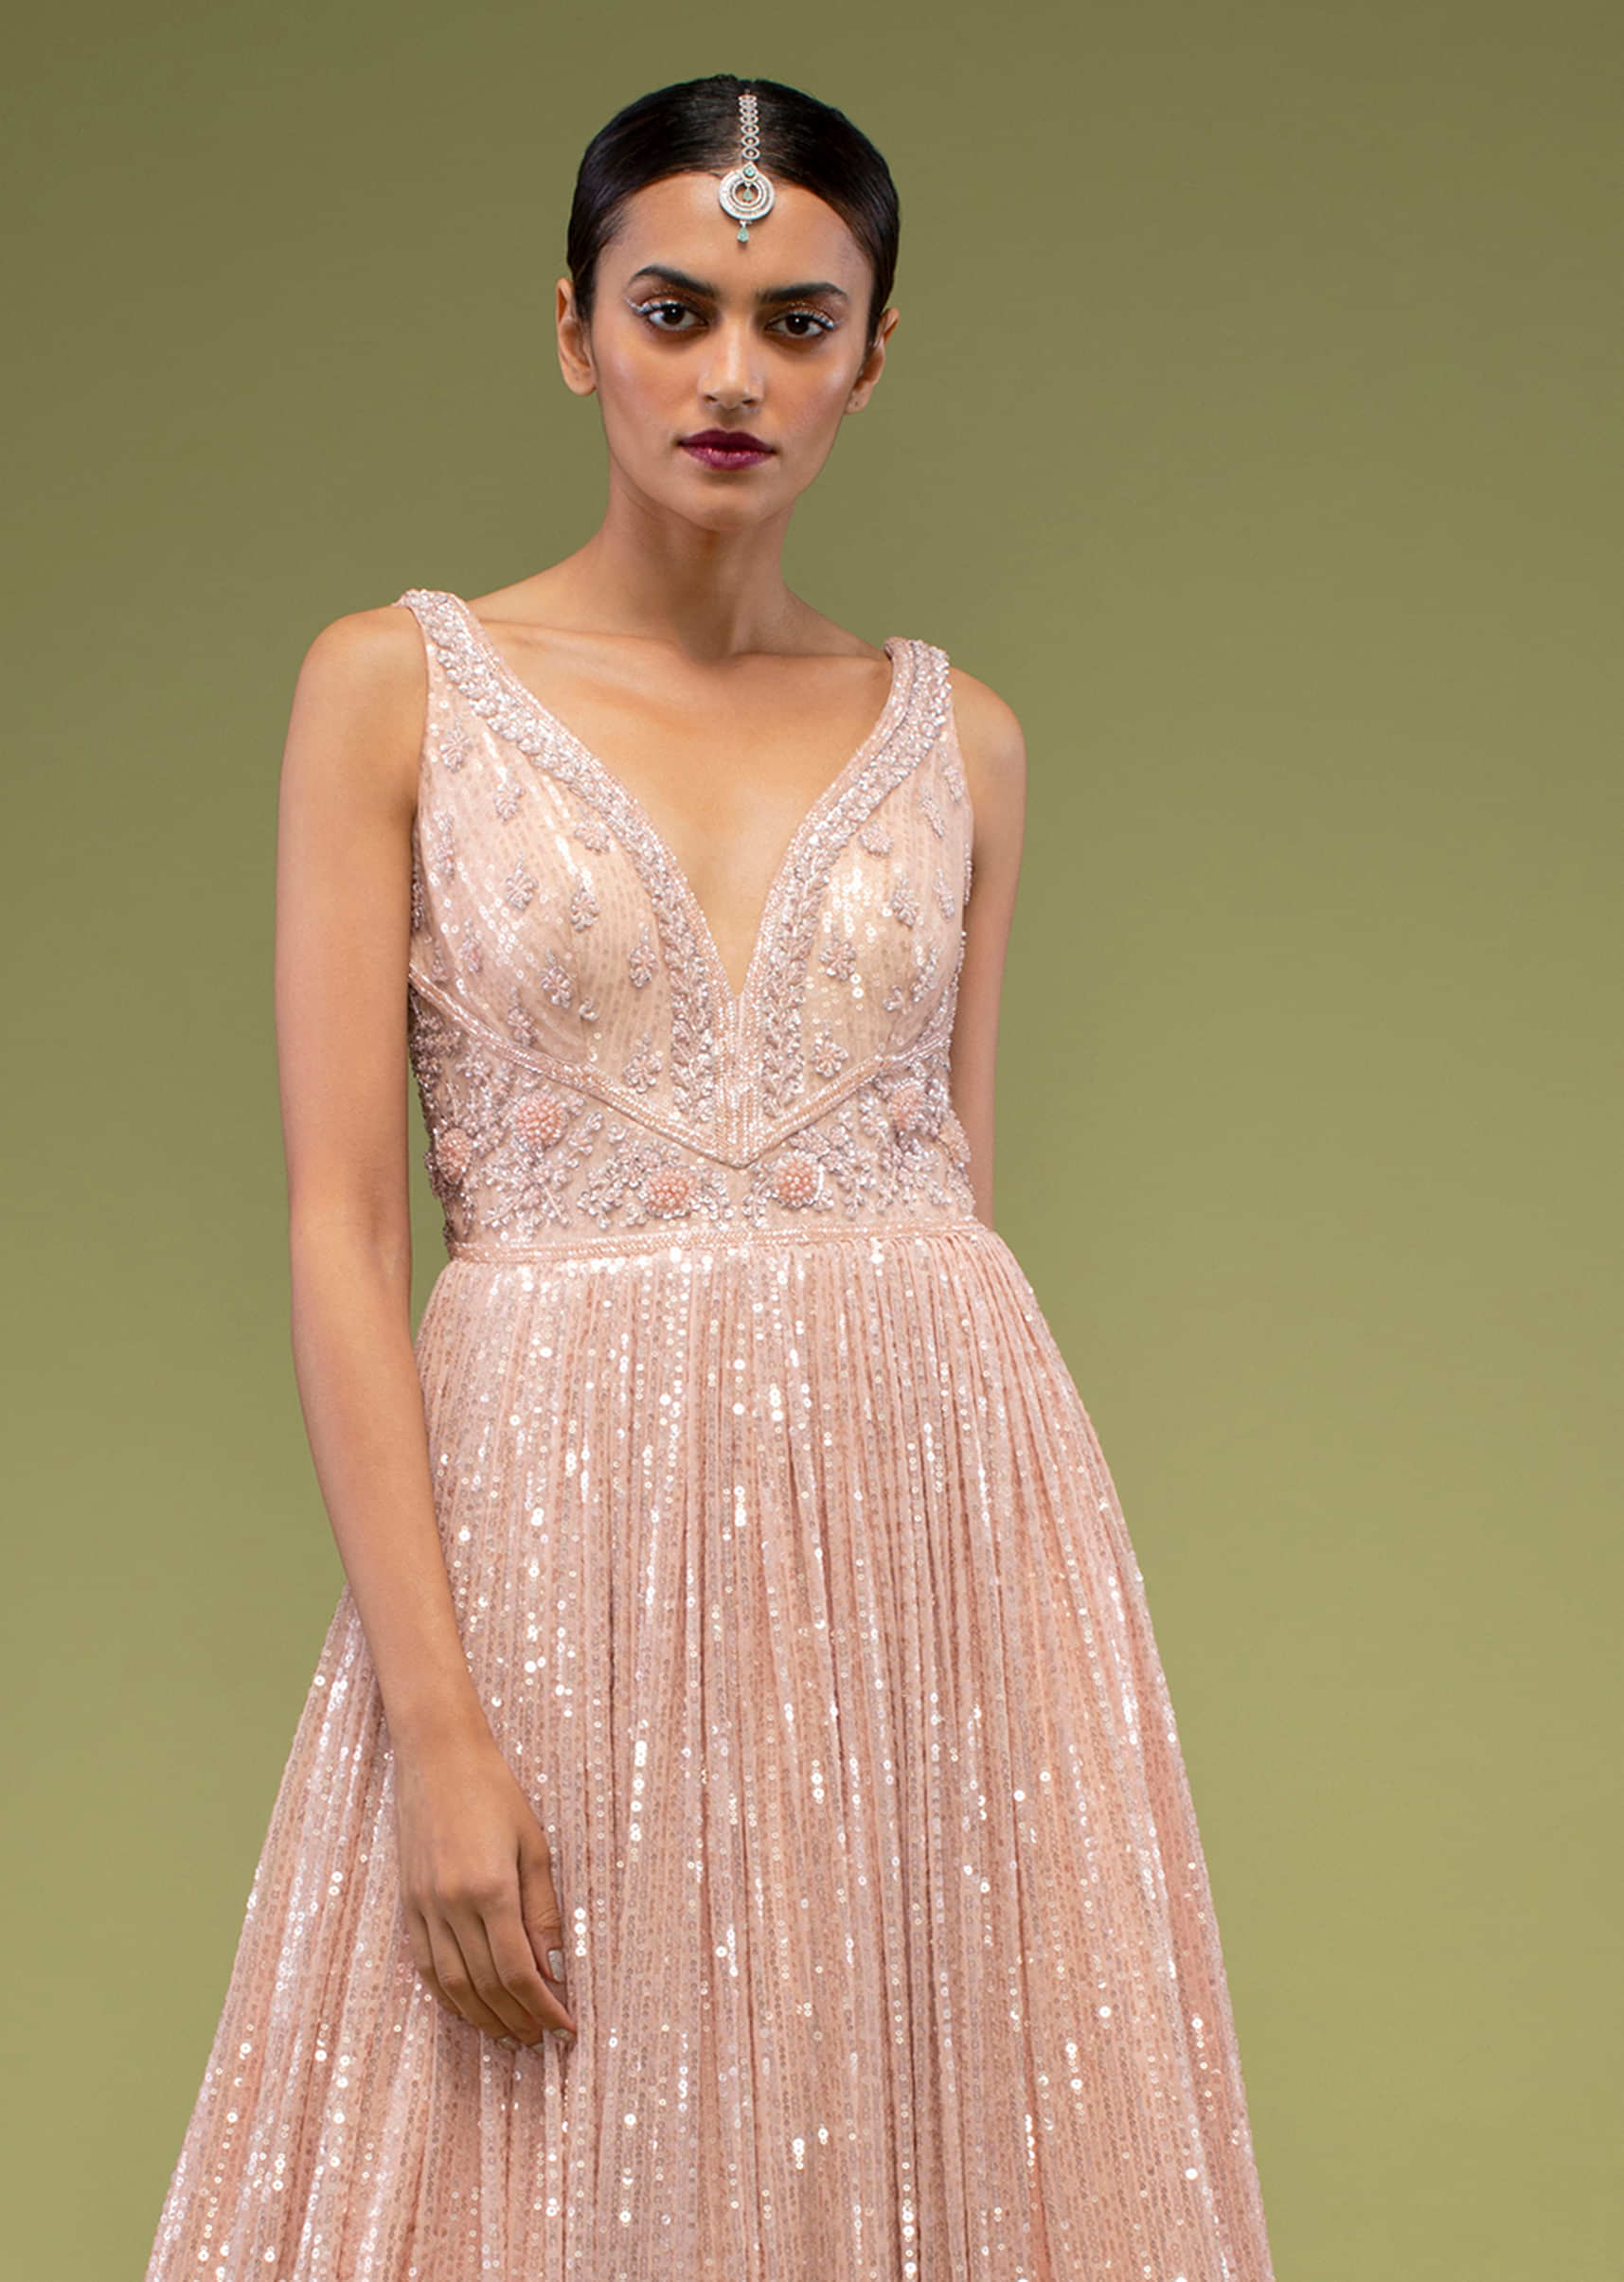 Peach Blush Gown In Sleeveless With Sequins Embroidery, Comes In A Sweetheart Neckline With Floral Embroidered Buttis